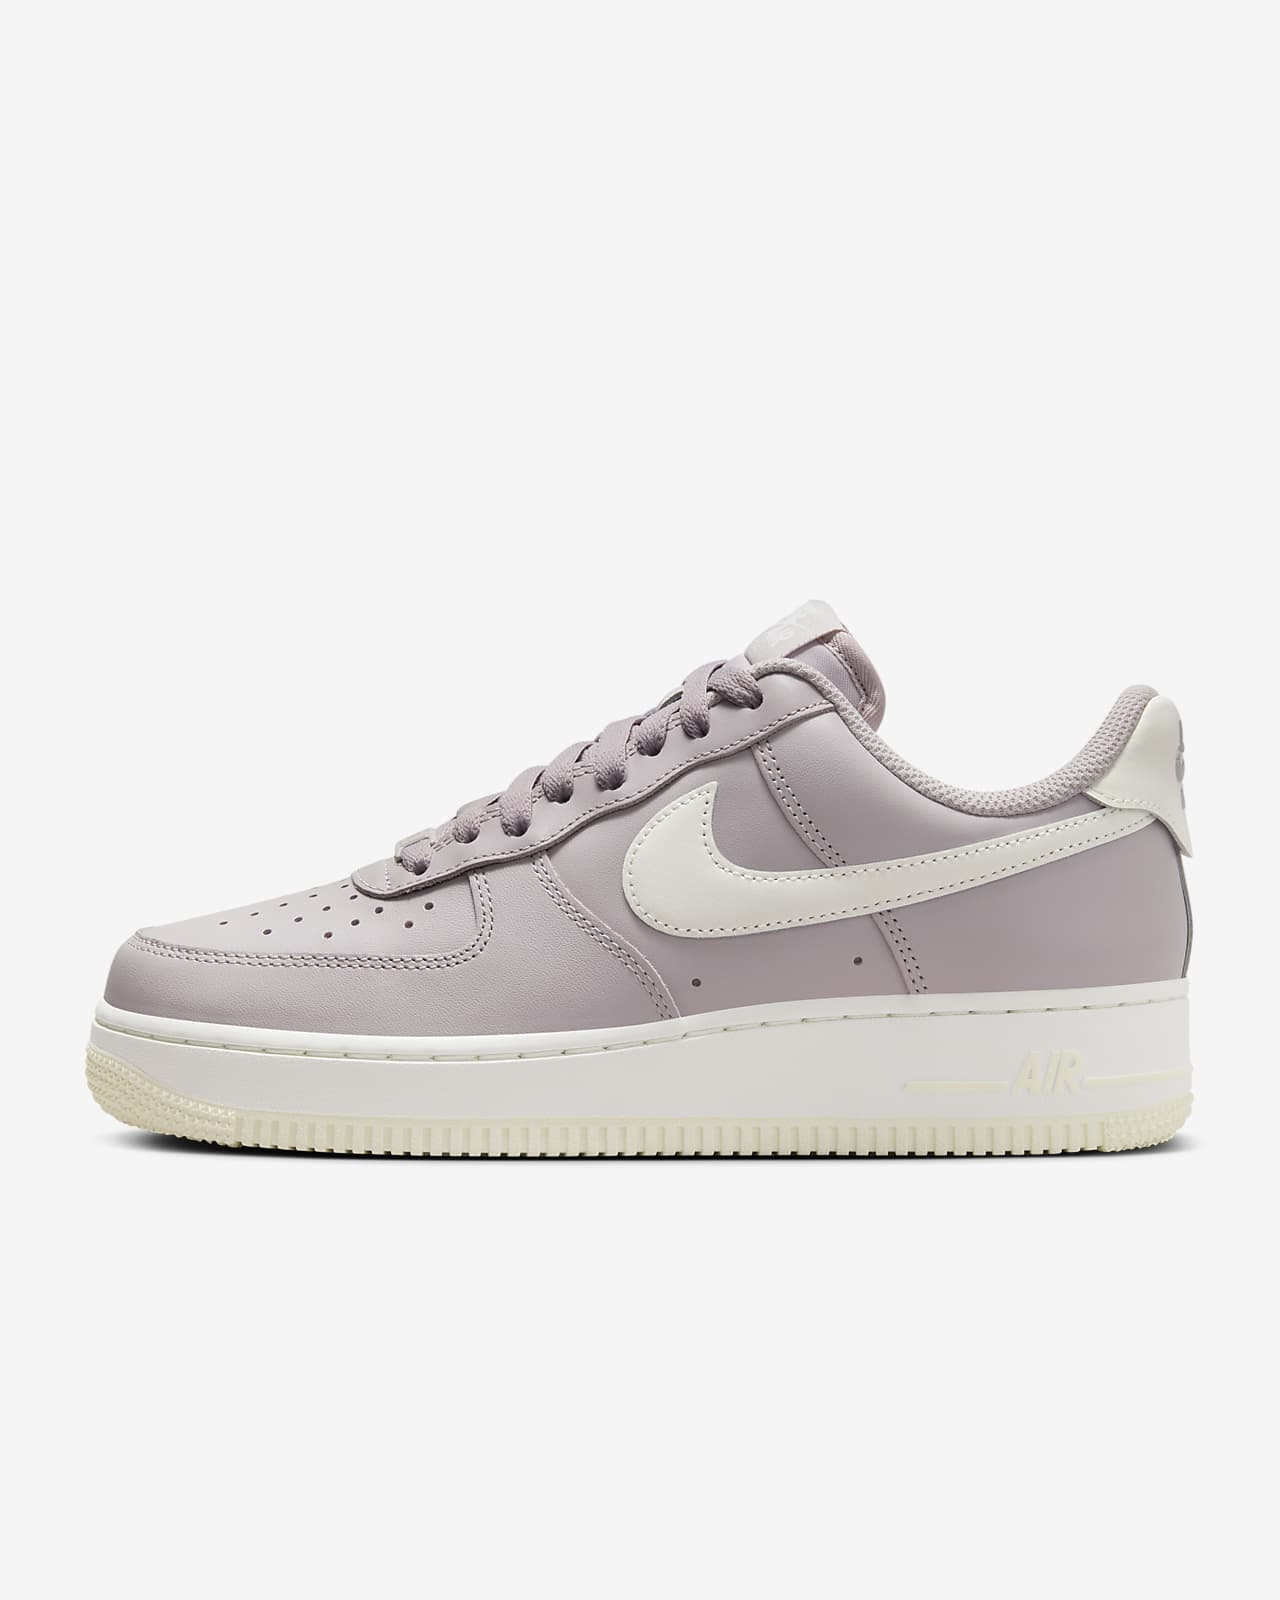 How Do Women's Nike Air Force 1 Fit?